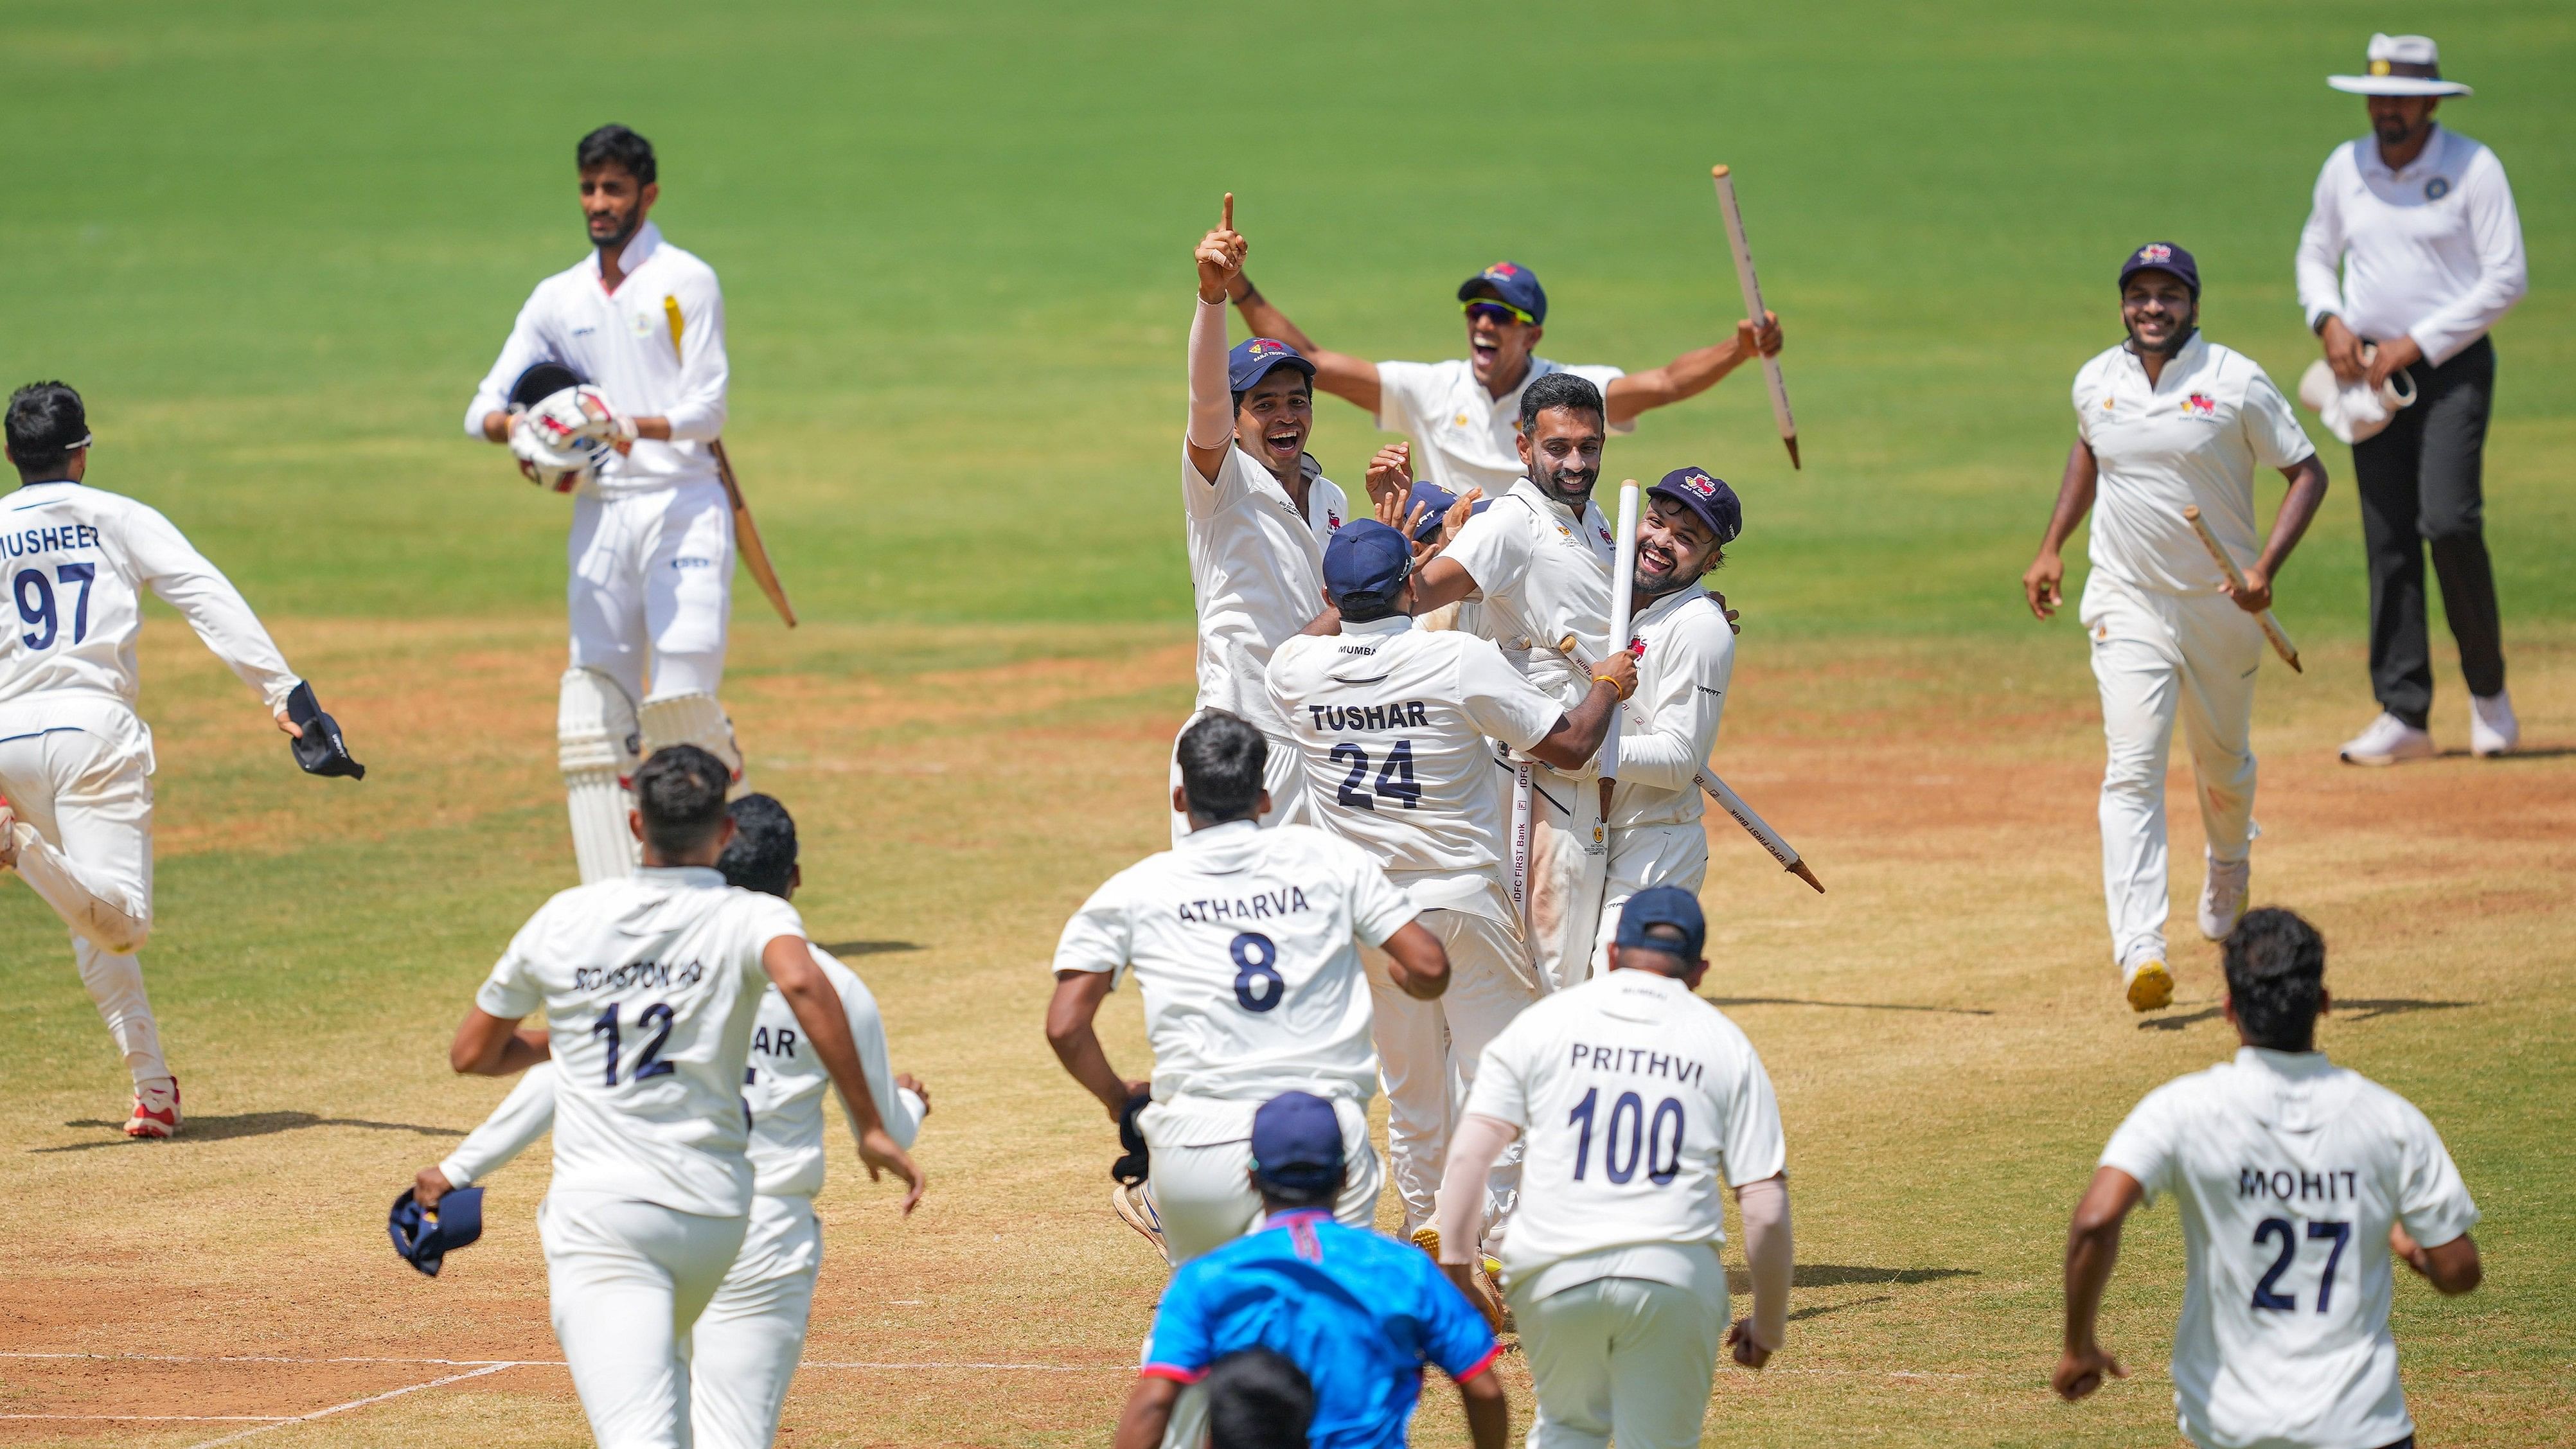 <div class="paragraphs"><p>Mumbai, who emerged Ranji Trophy champions, and runners-up Vidarbha ended up playing almost 40 days of cricket in 72 days. The schedule was only marginally less harsh for teams that reached knockouts.</p></div>